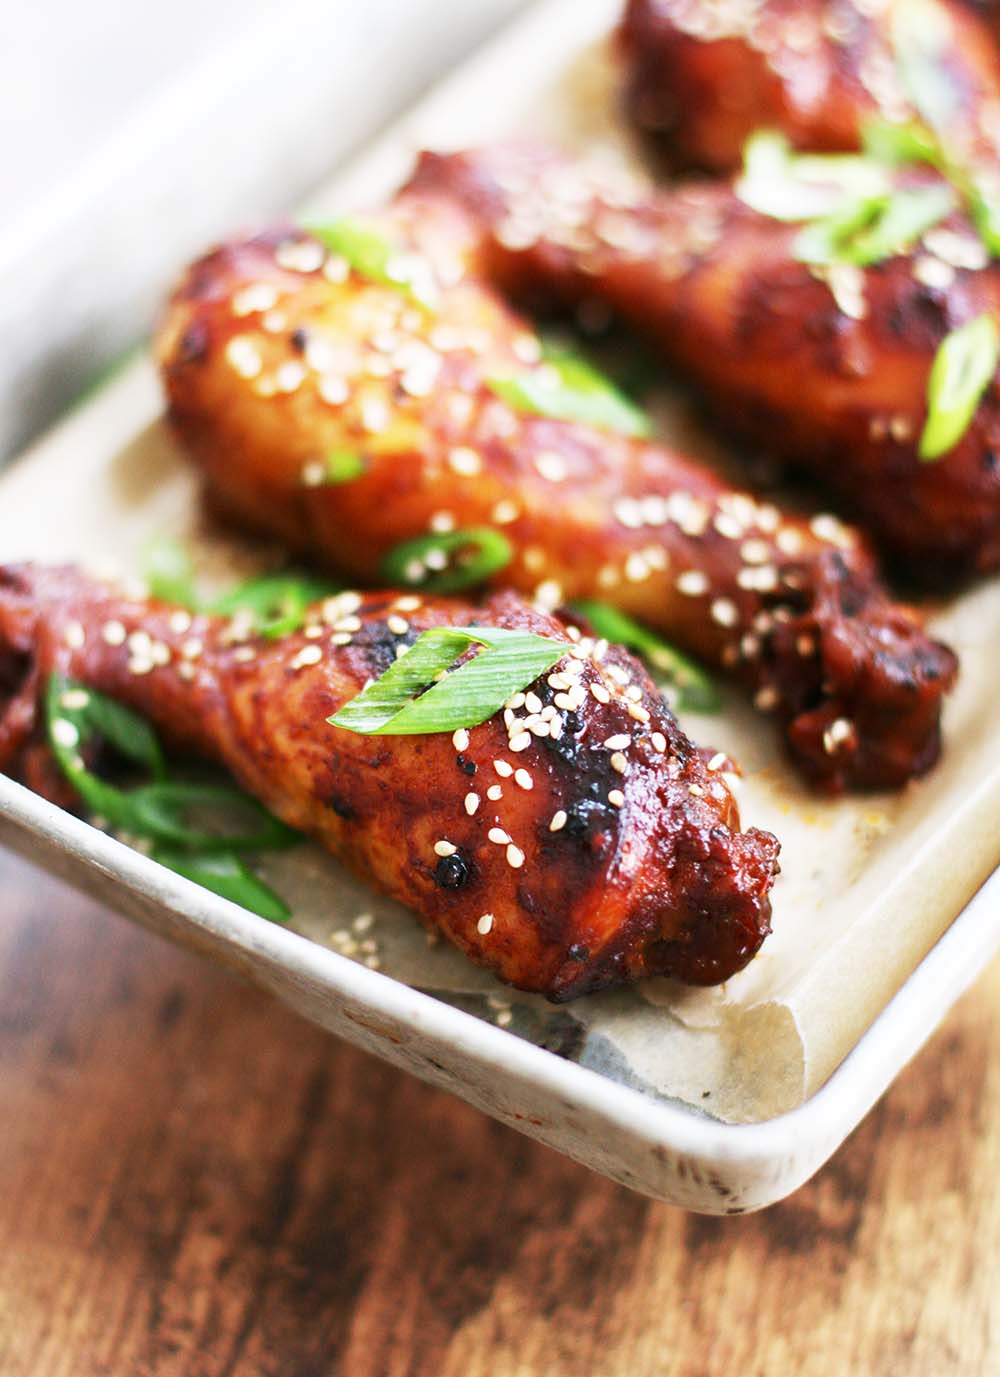 Slow cooker chicken drumsticks: The best way to make drumsticks. Moist and full of flavor!